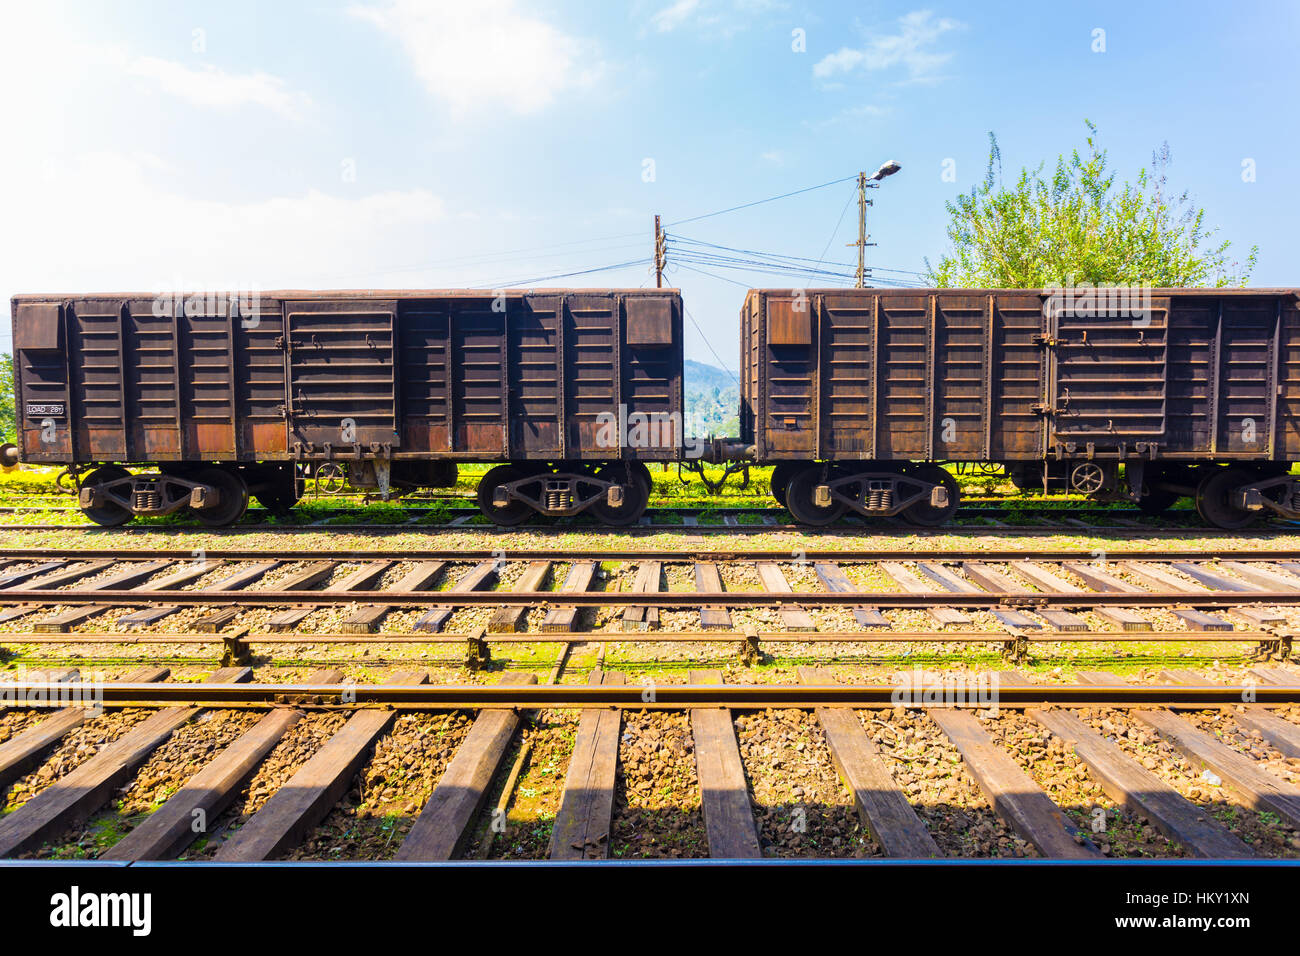 Side view of an old stationary rusted cargo carriage car sitting parked on train tracks, part of Sri Lanka Railways Stock Photo